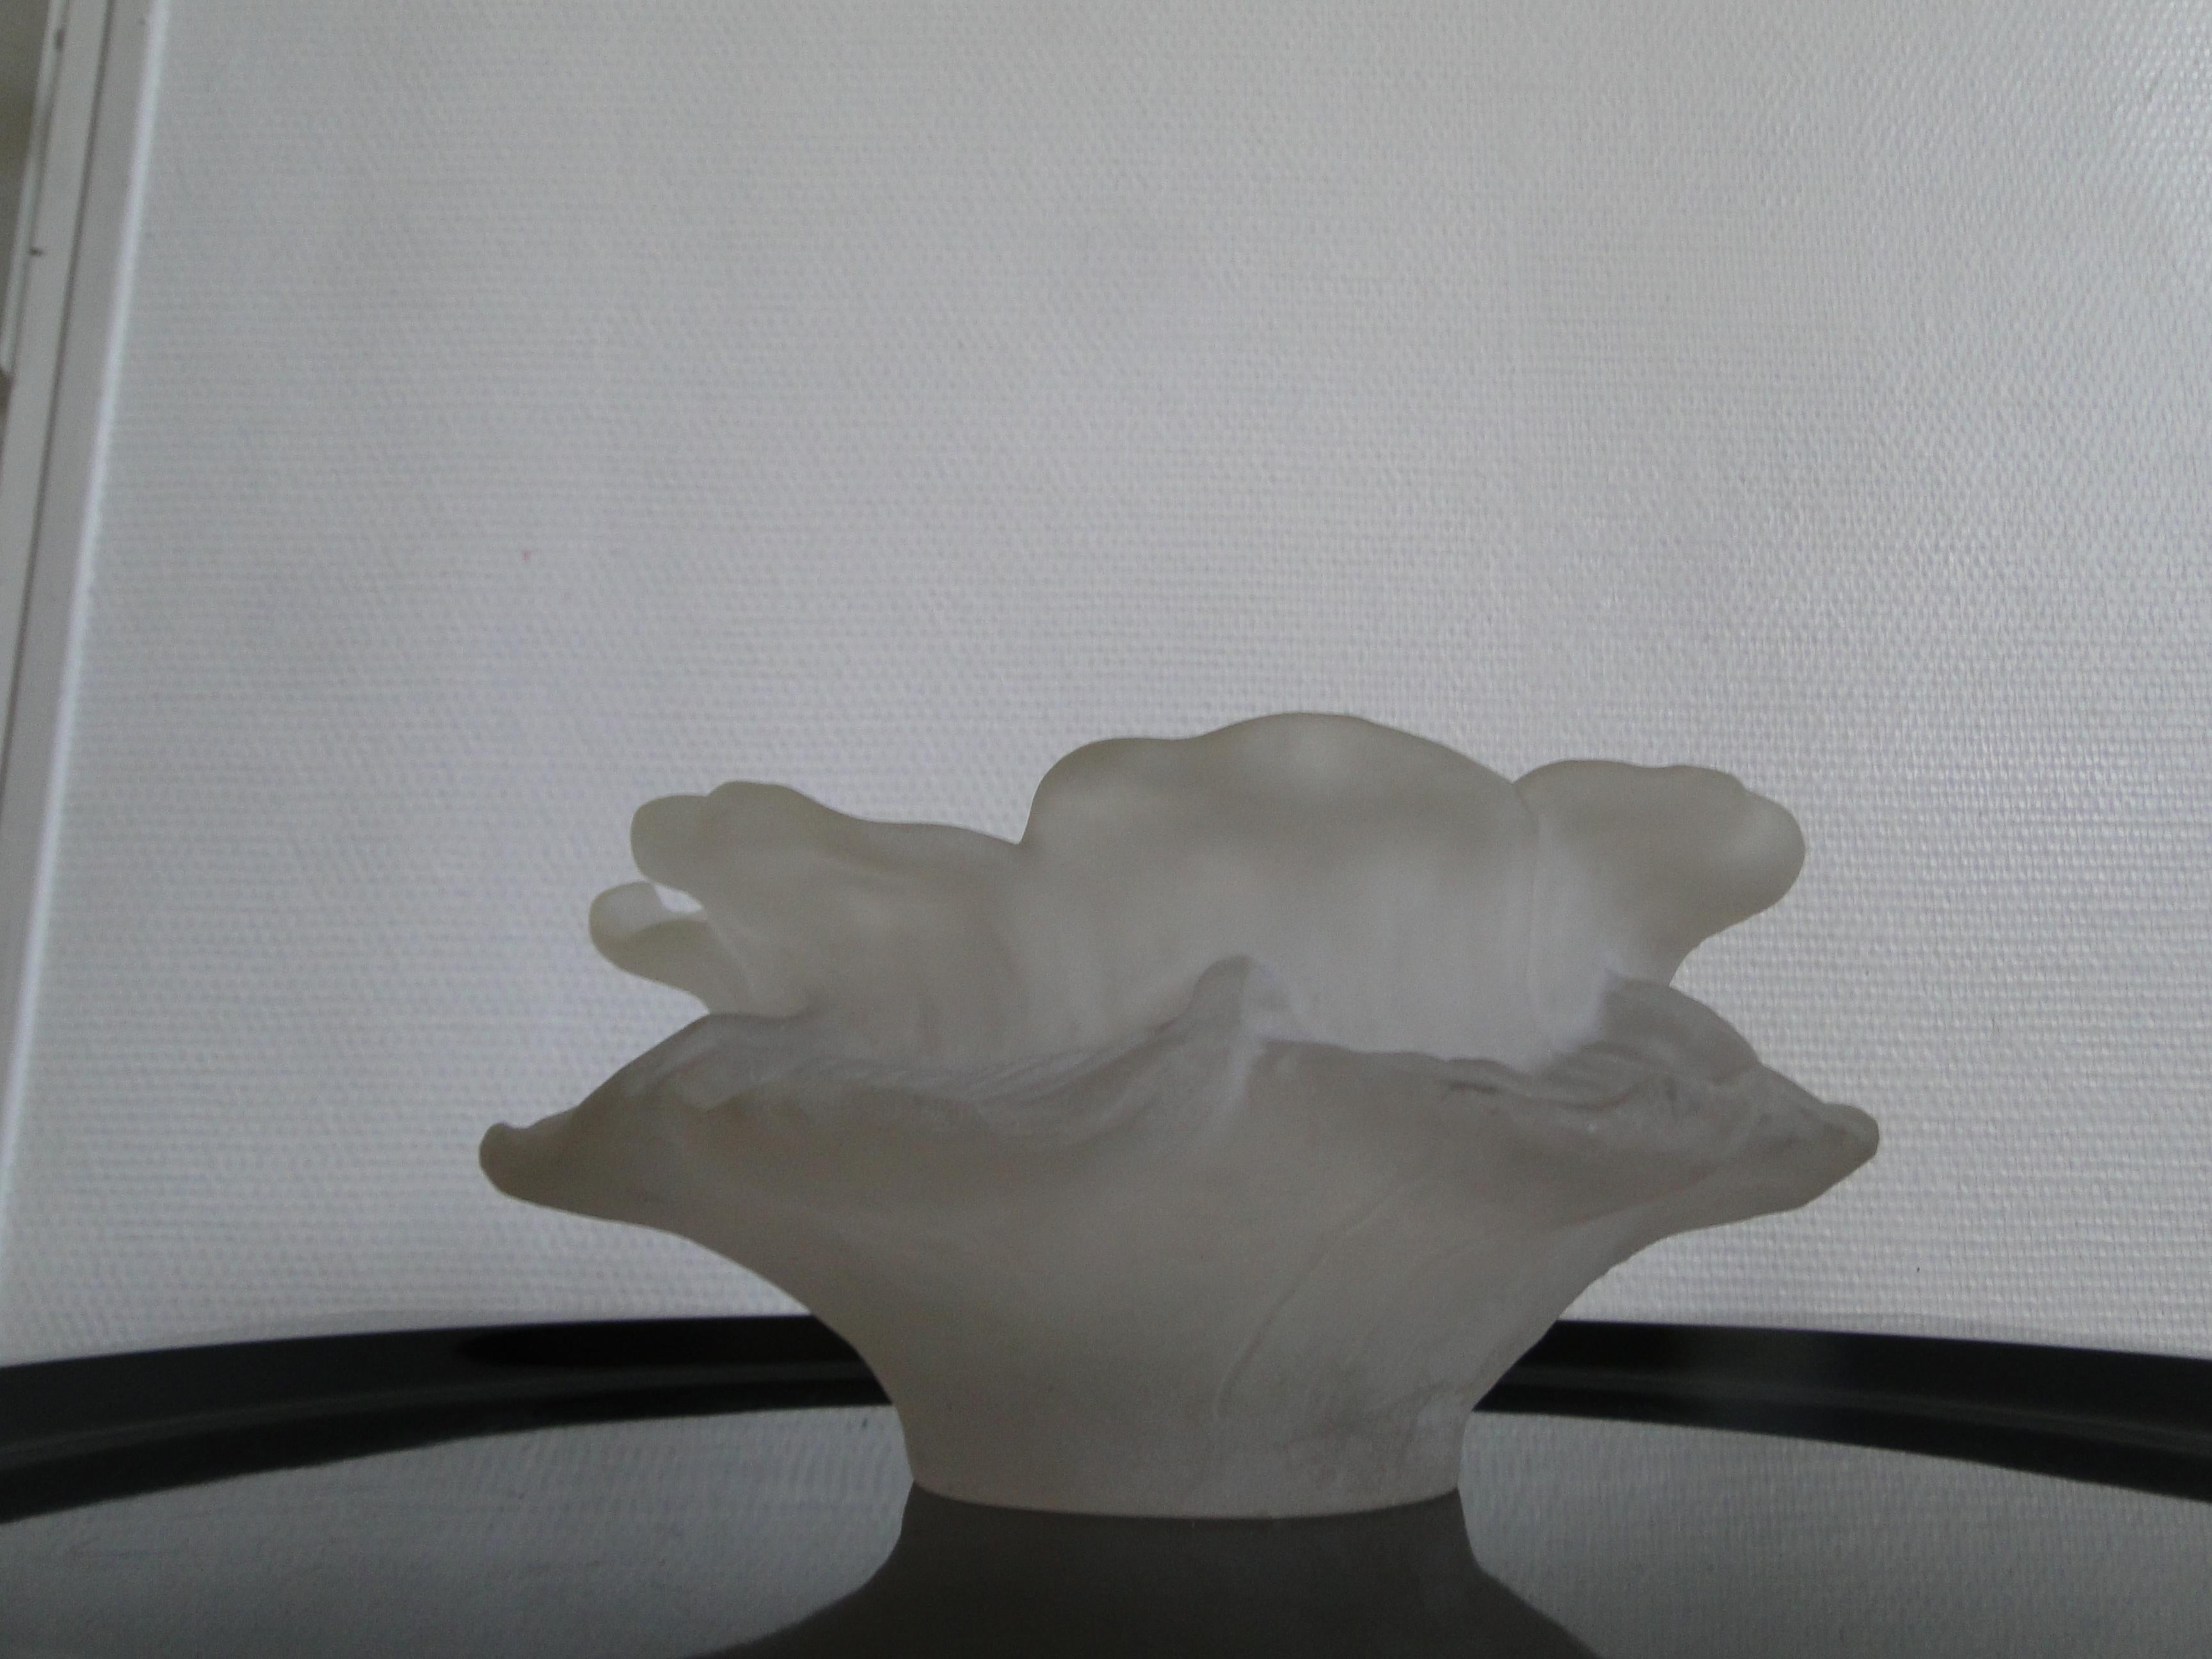 Lovely frosted resin cabbage bowl by Dorothy Thorpe.
Signed under the object.
Beautiful decorative object.
Good condition.